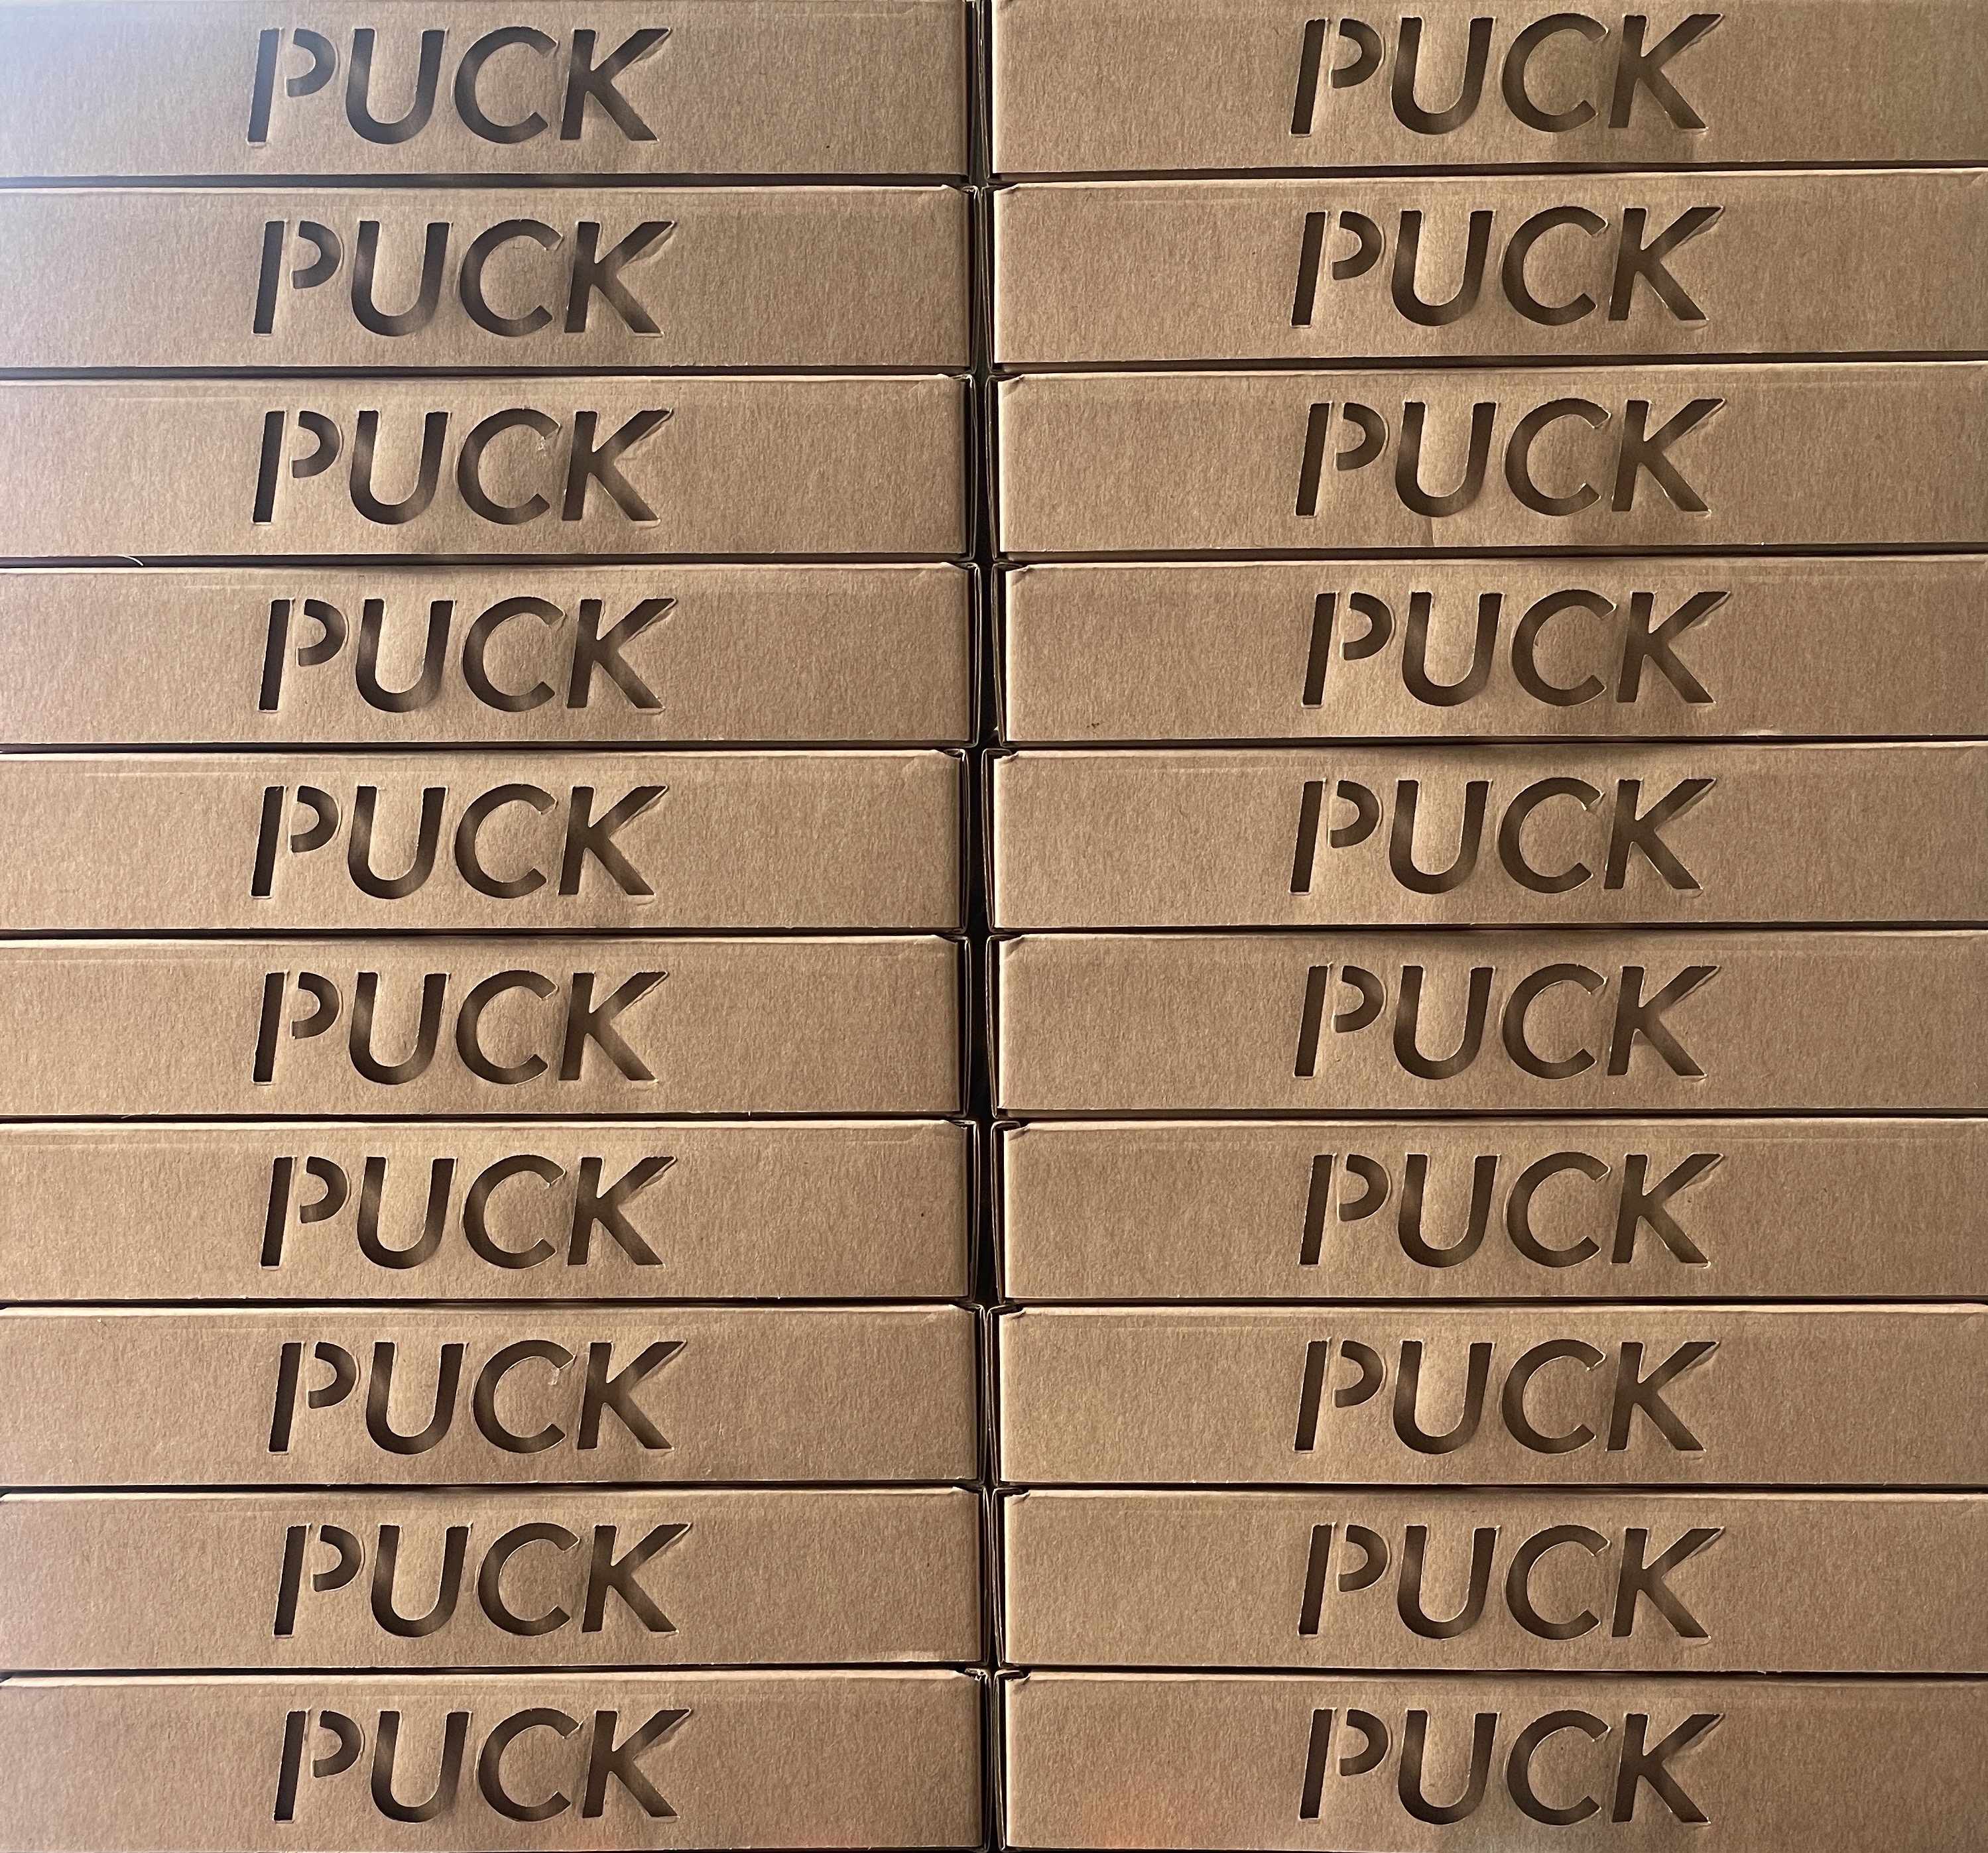 Protected: Trade Pack of 20 Solarcan PUCK